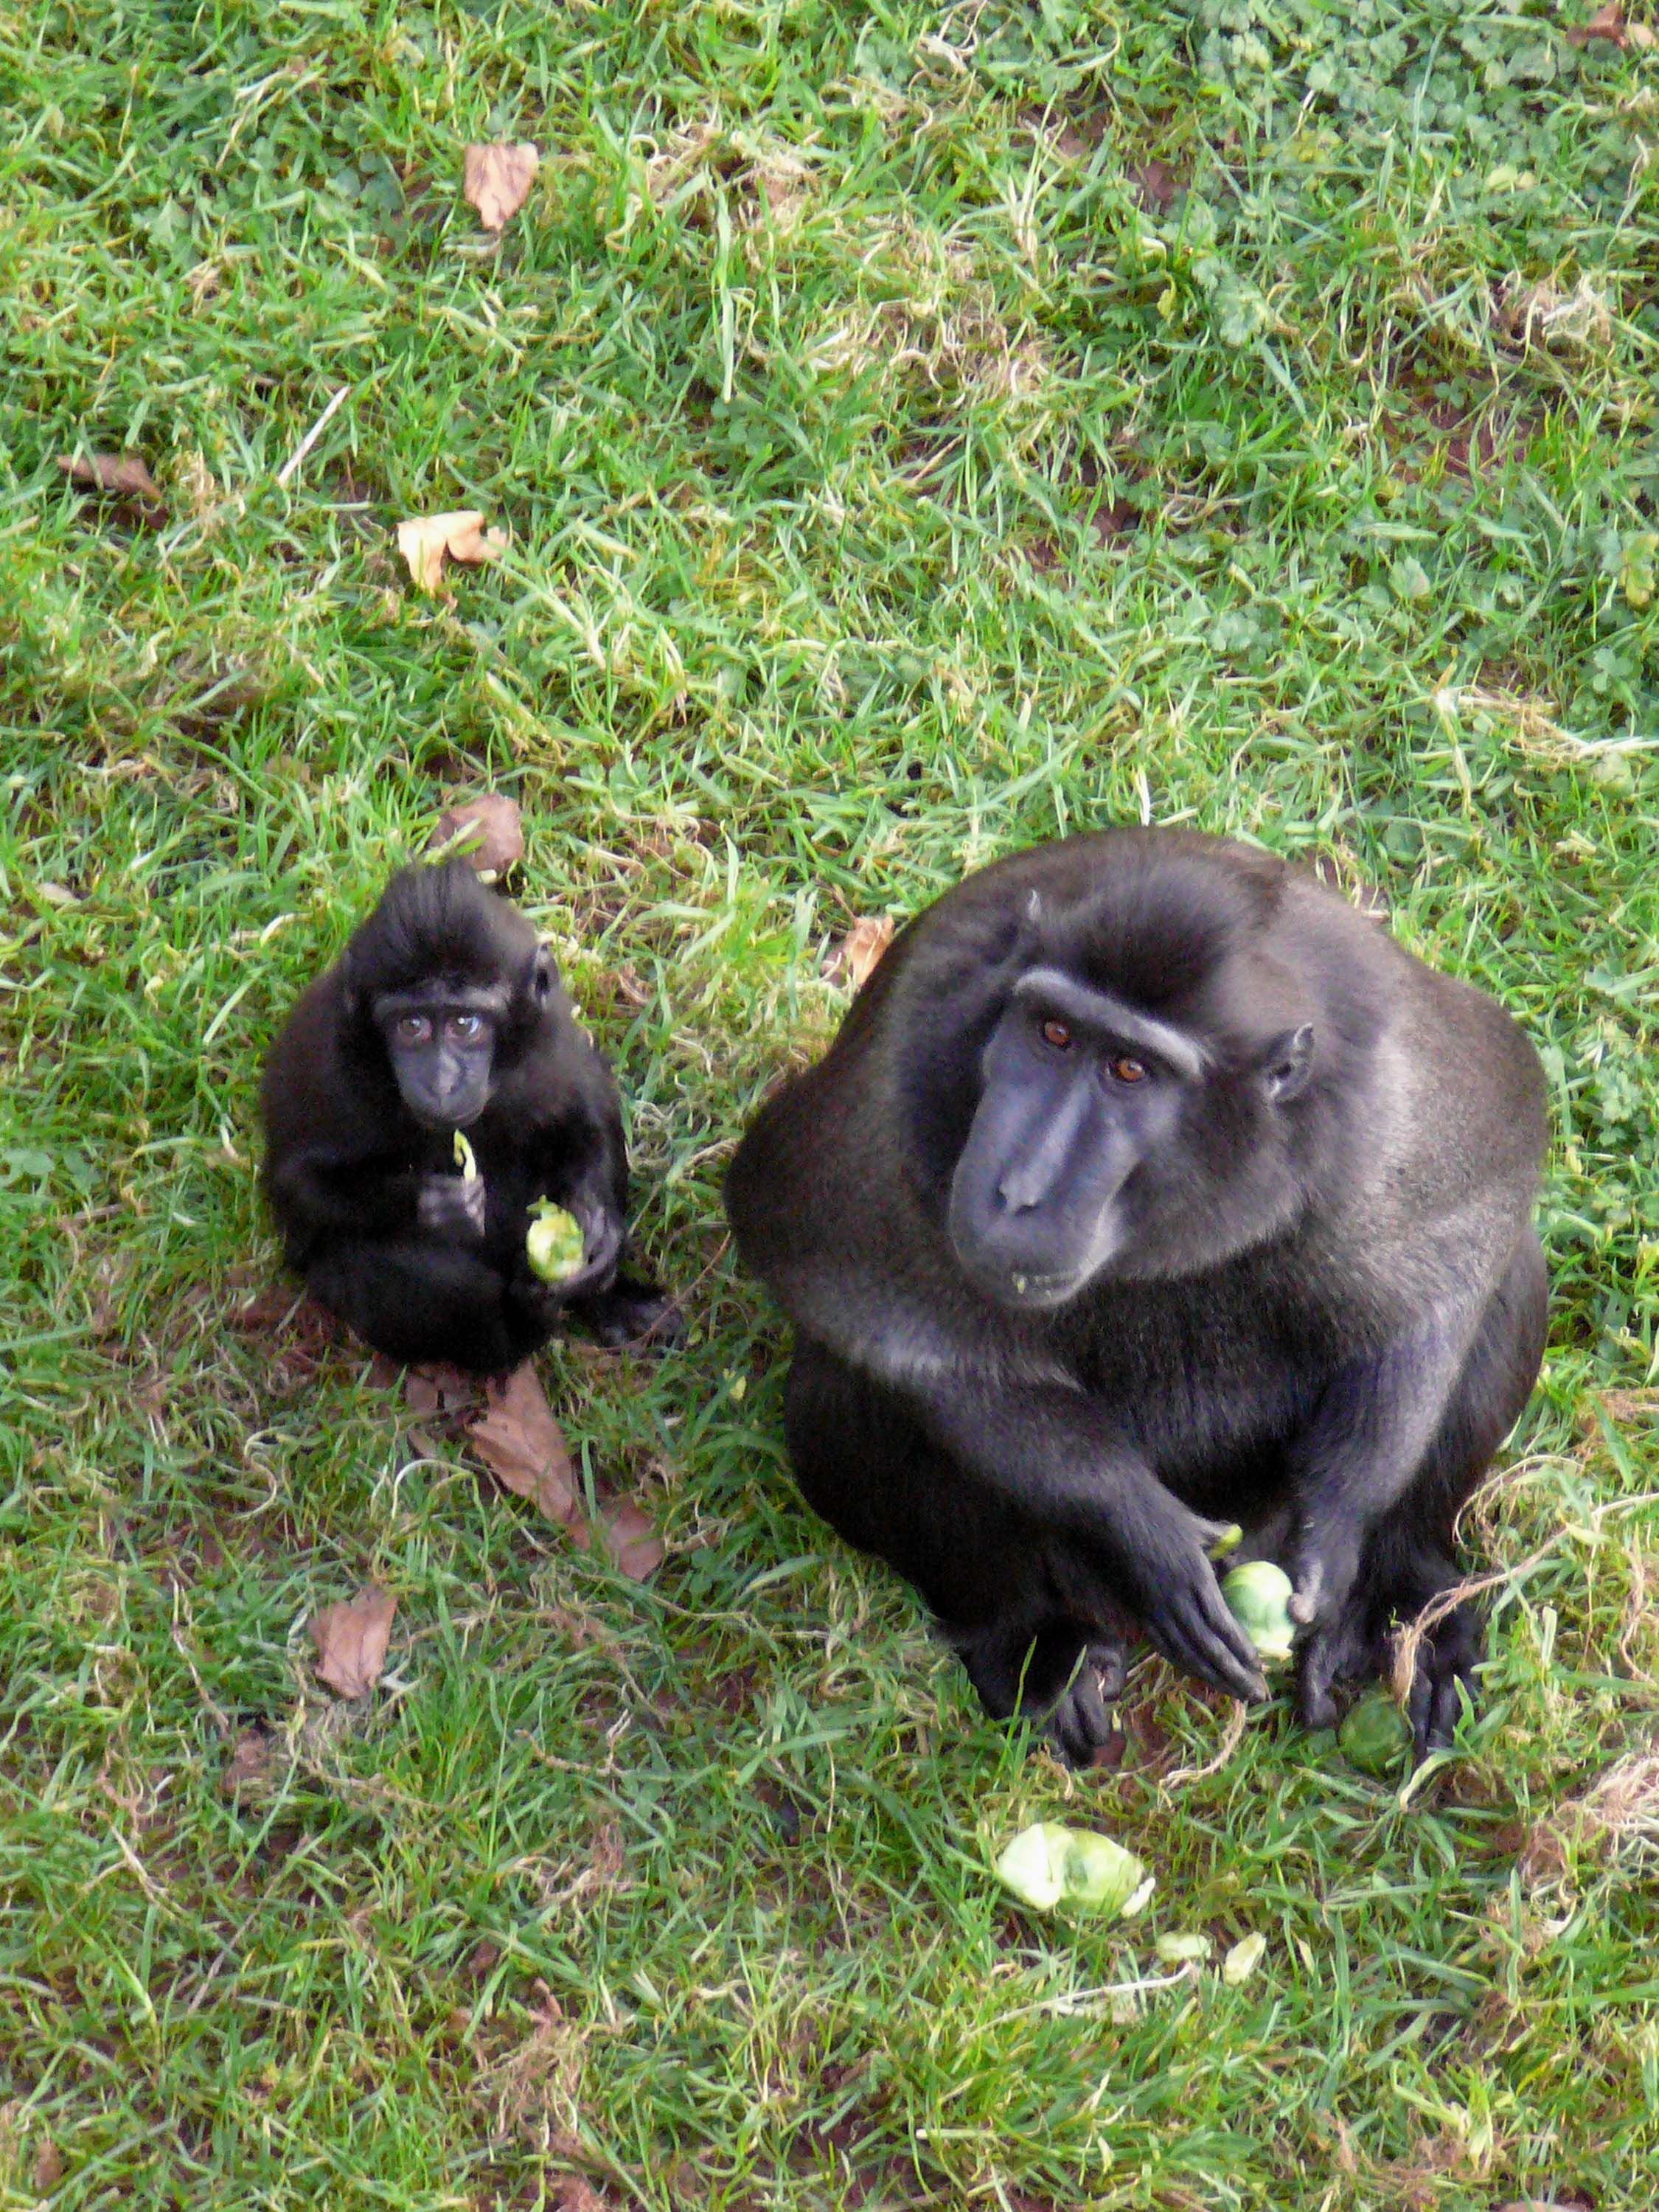 UK's Paignton Zoo bans monkeys from eating bananas for health